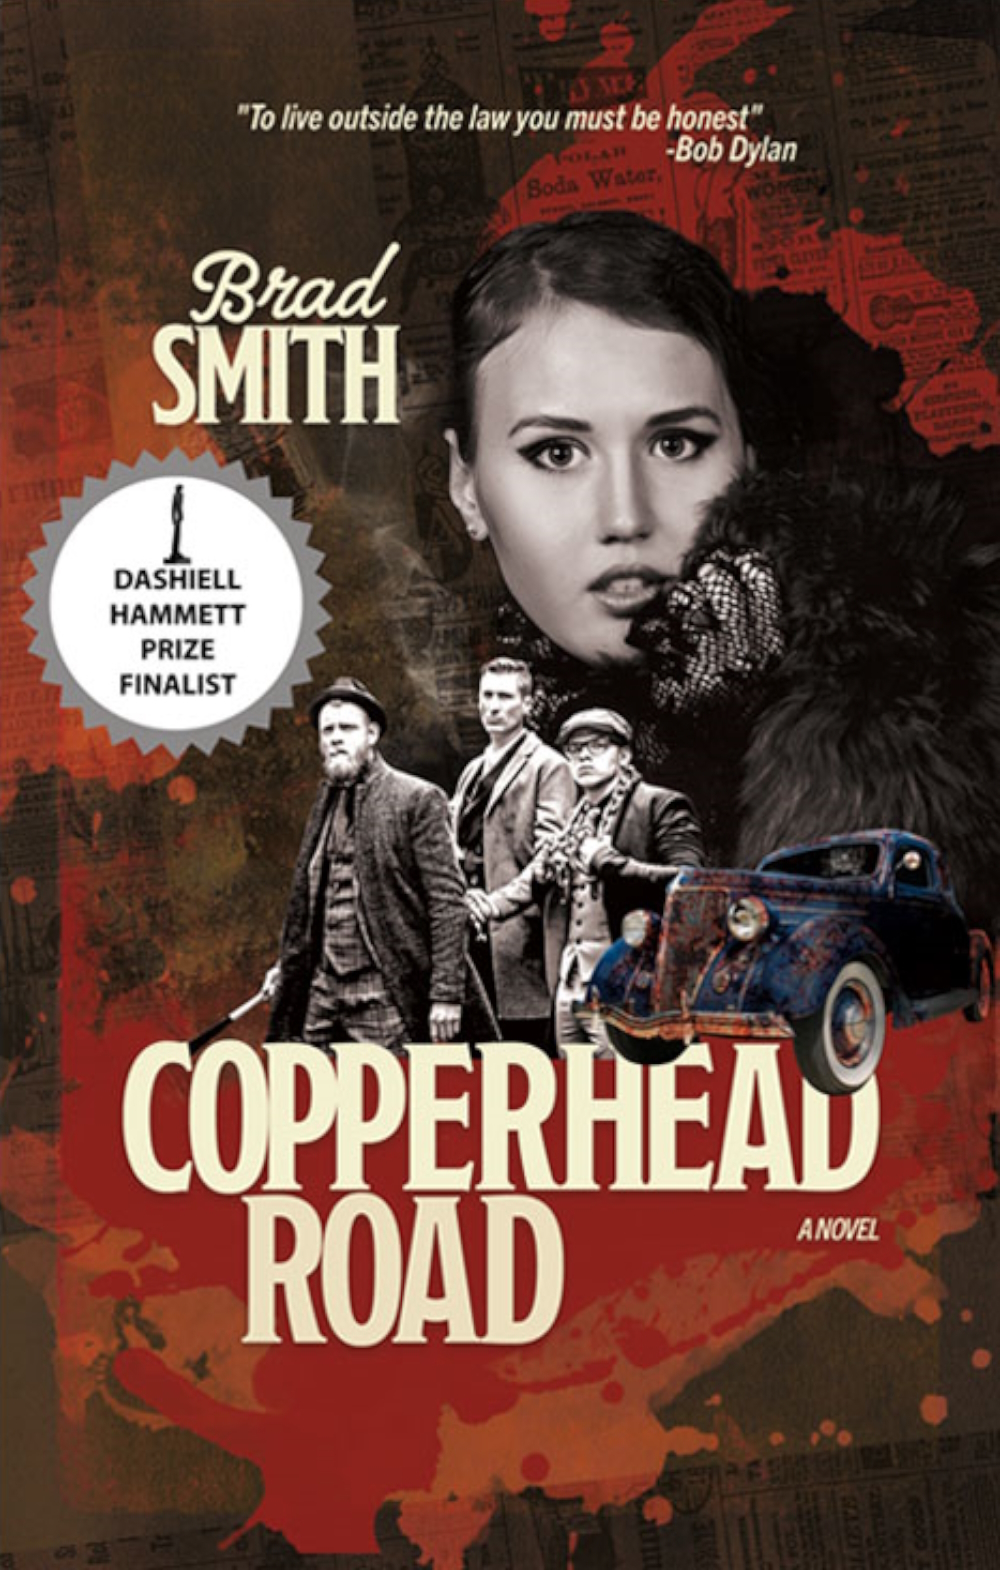 COPPERHEAD ROAD was shortlisted for the renowned Dashiell Hammett Award in 2022.